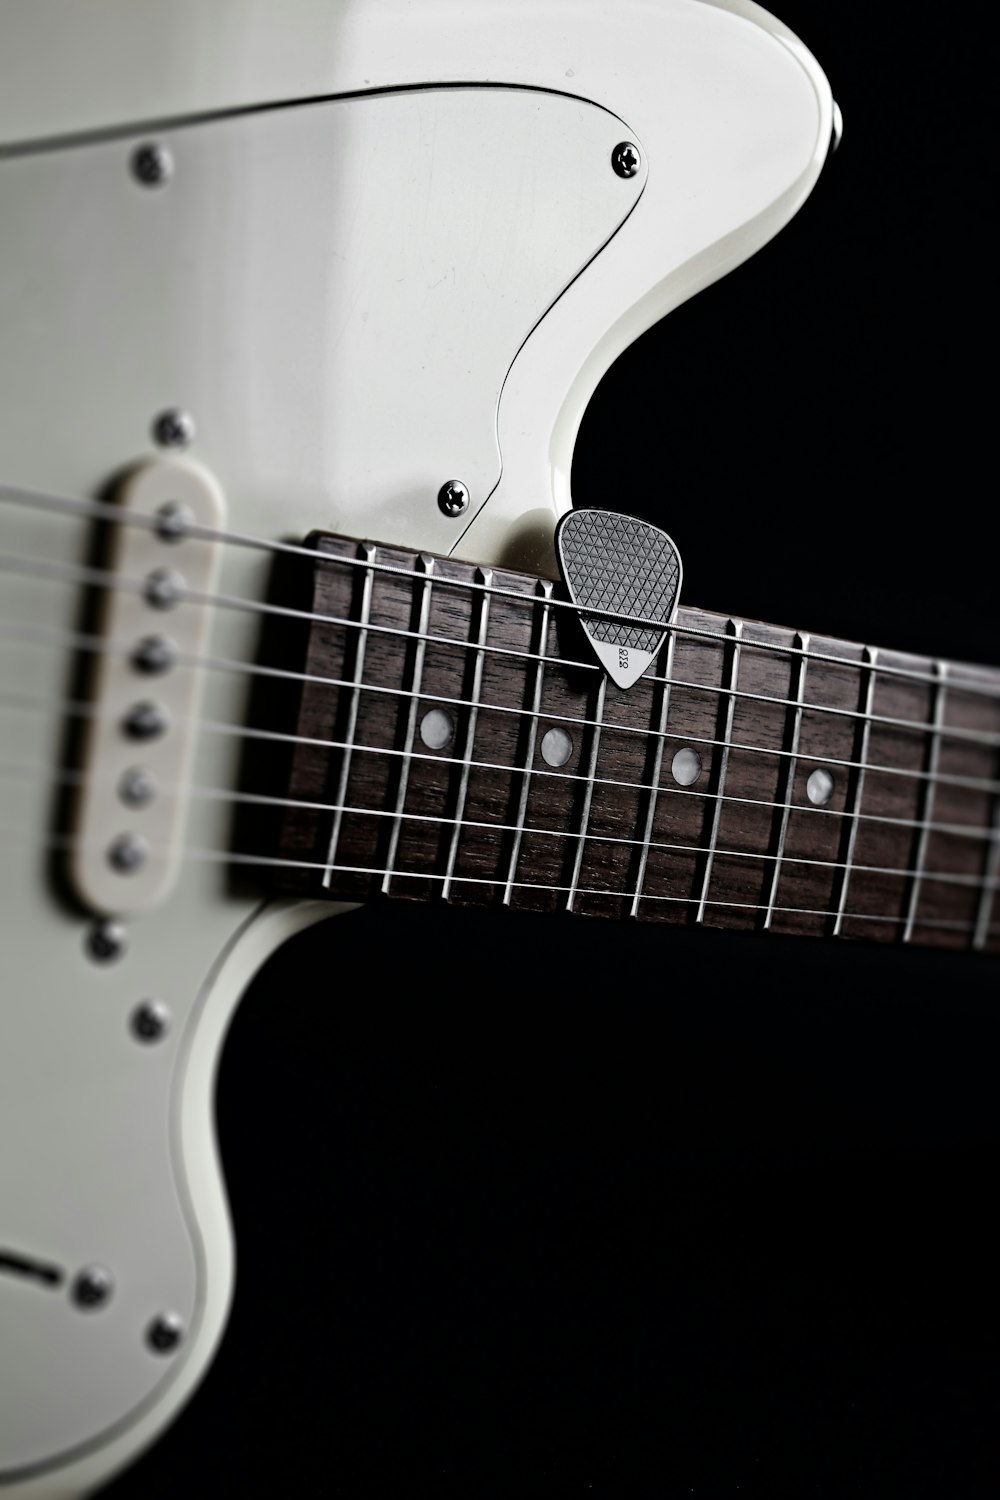 a close up of a guitar neck with a guitar pick